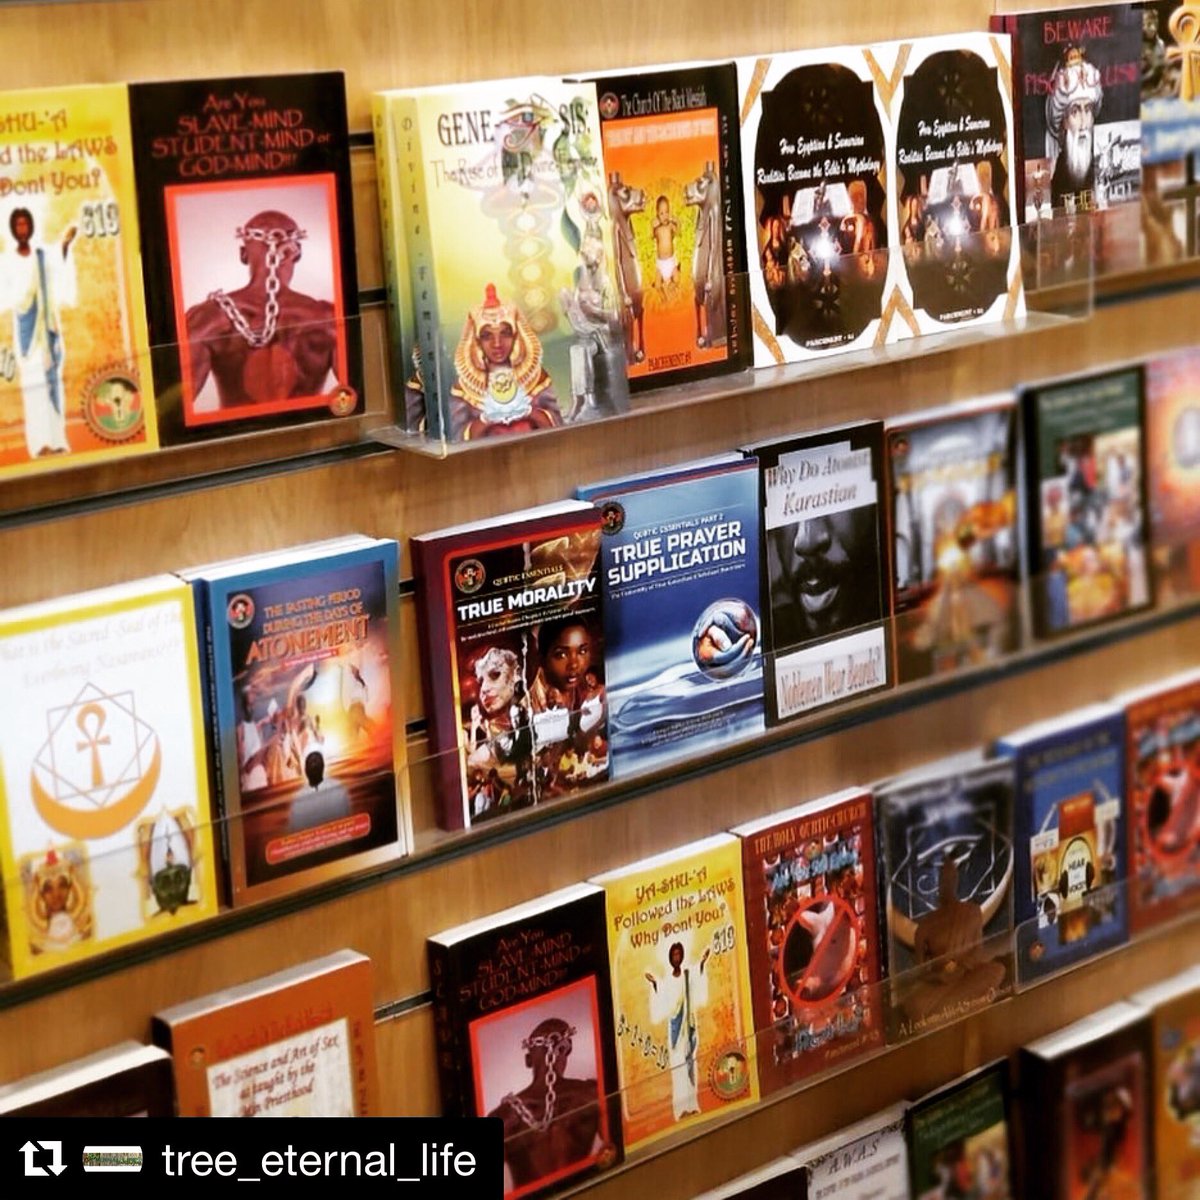 #Repost @tree_eternal_life
・・・
From the Holy Qubtic Church we have ALL the books for purchase! #atonism #atonisrising #atonists #africanscriptures #africanreligion #africanbooks #africanbookstore #SupportBlackBusiness